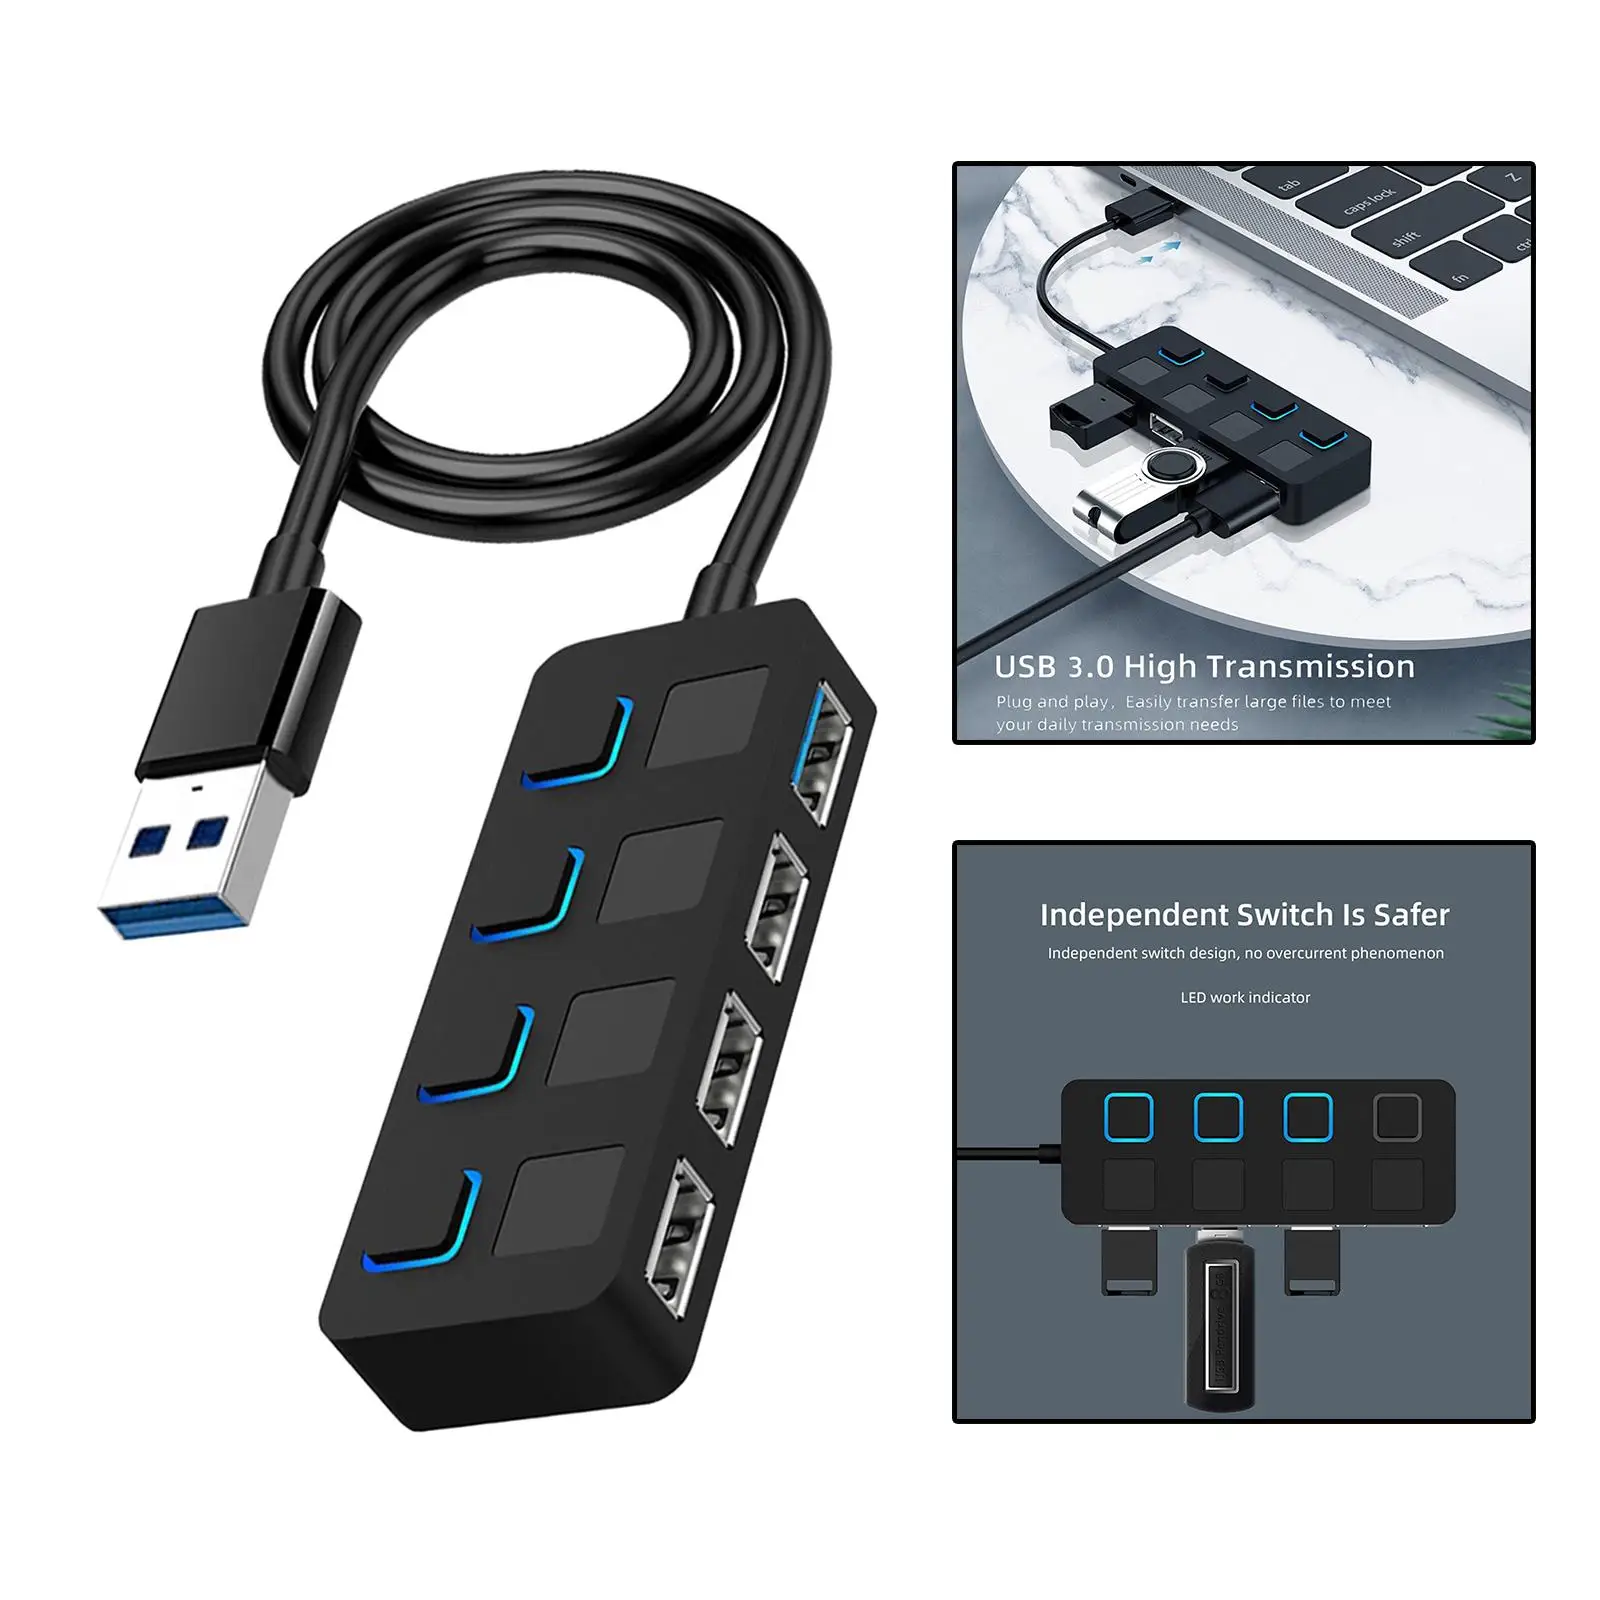 4 Port USB 3.0 Hub, with Extended Cable Compact Data USB Hub for Mobile HDD PC for Surface Pro (Charging Not Supported)